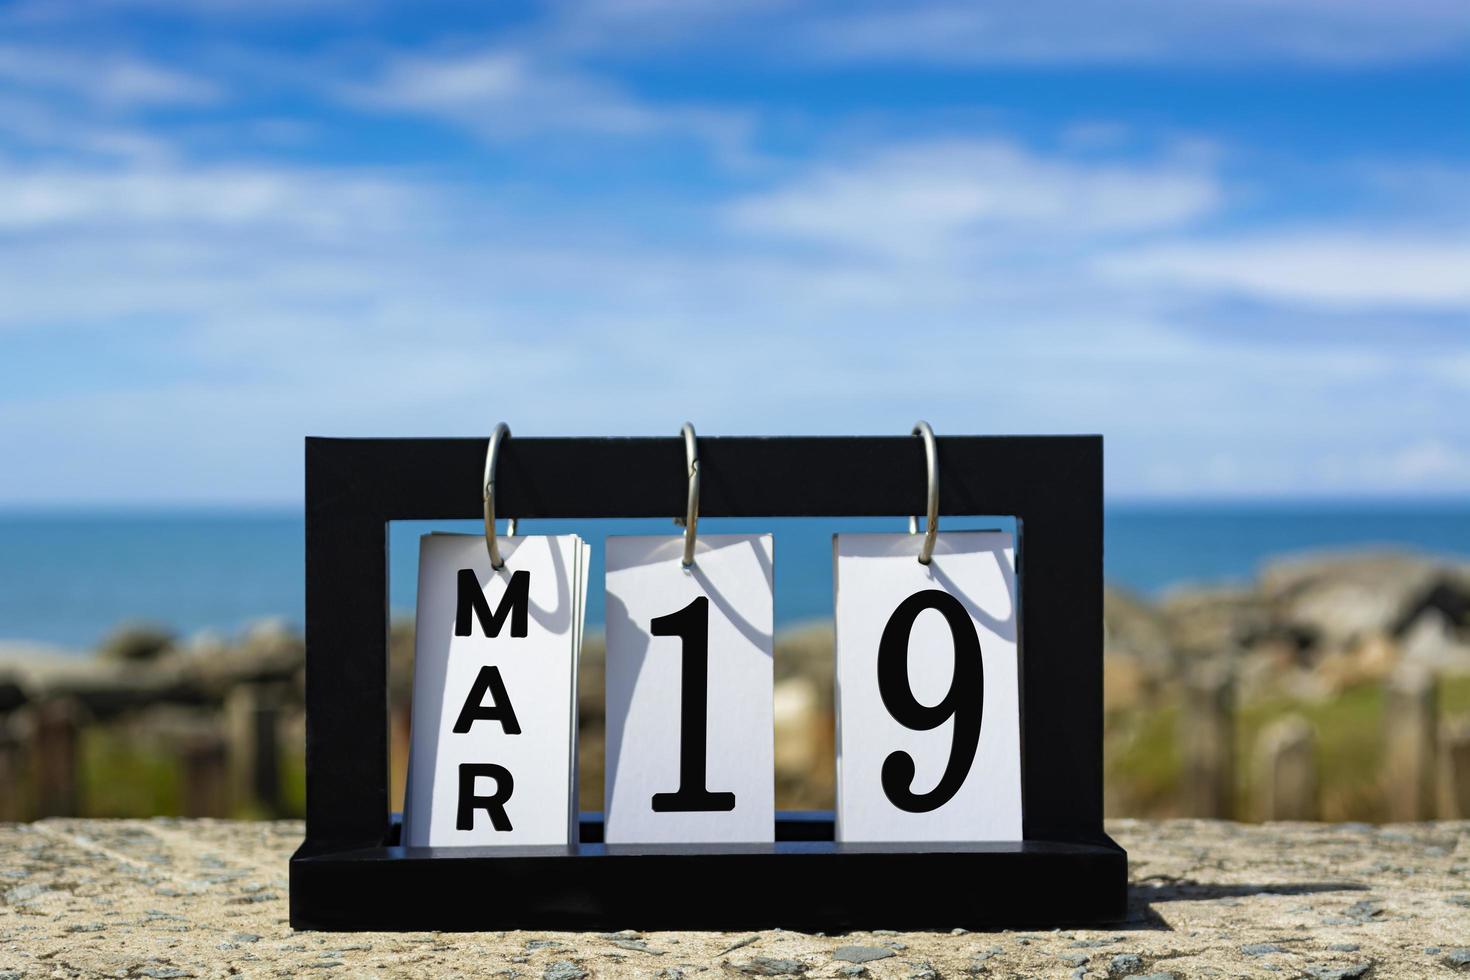 Mar 19 calendar date text on wooden frame with blurred background of ocean. photo